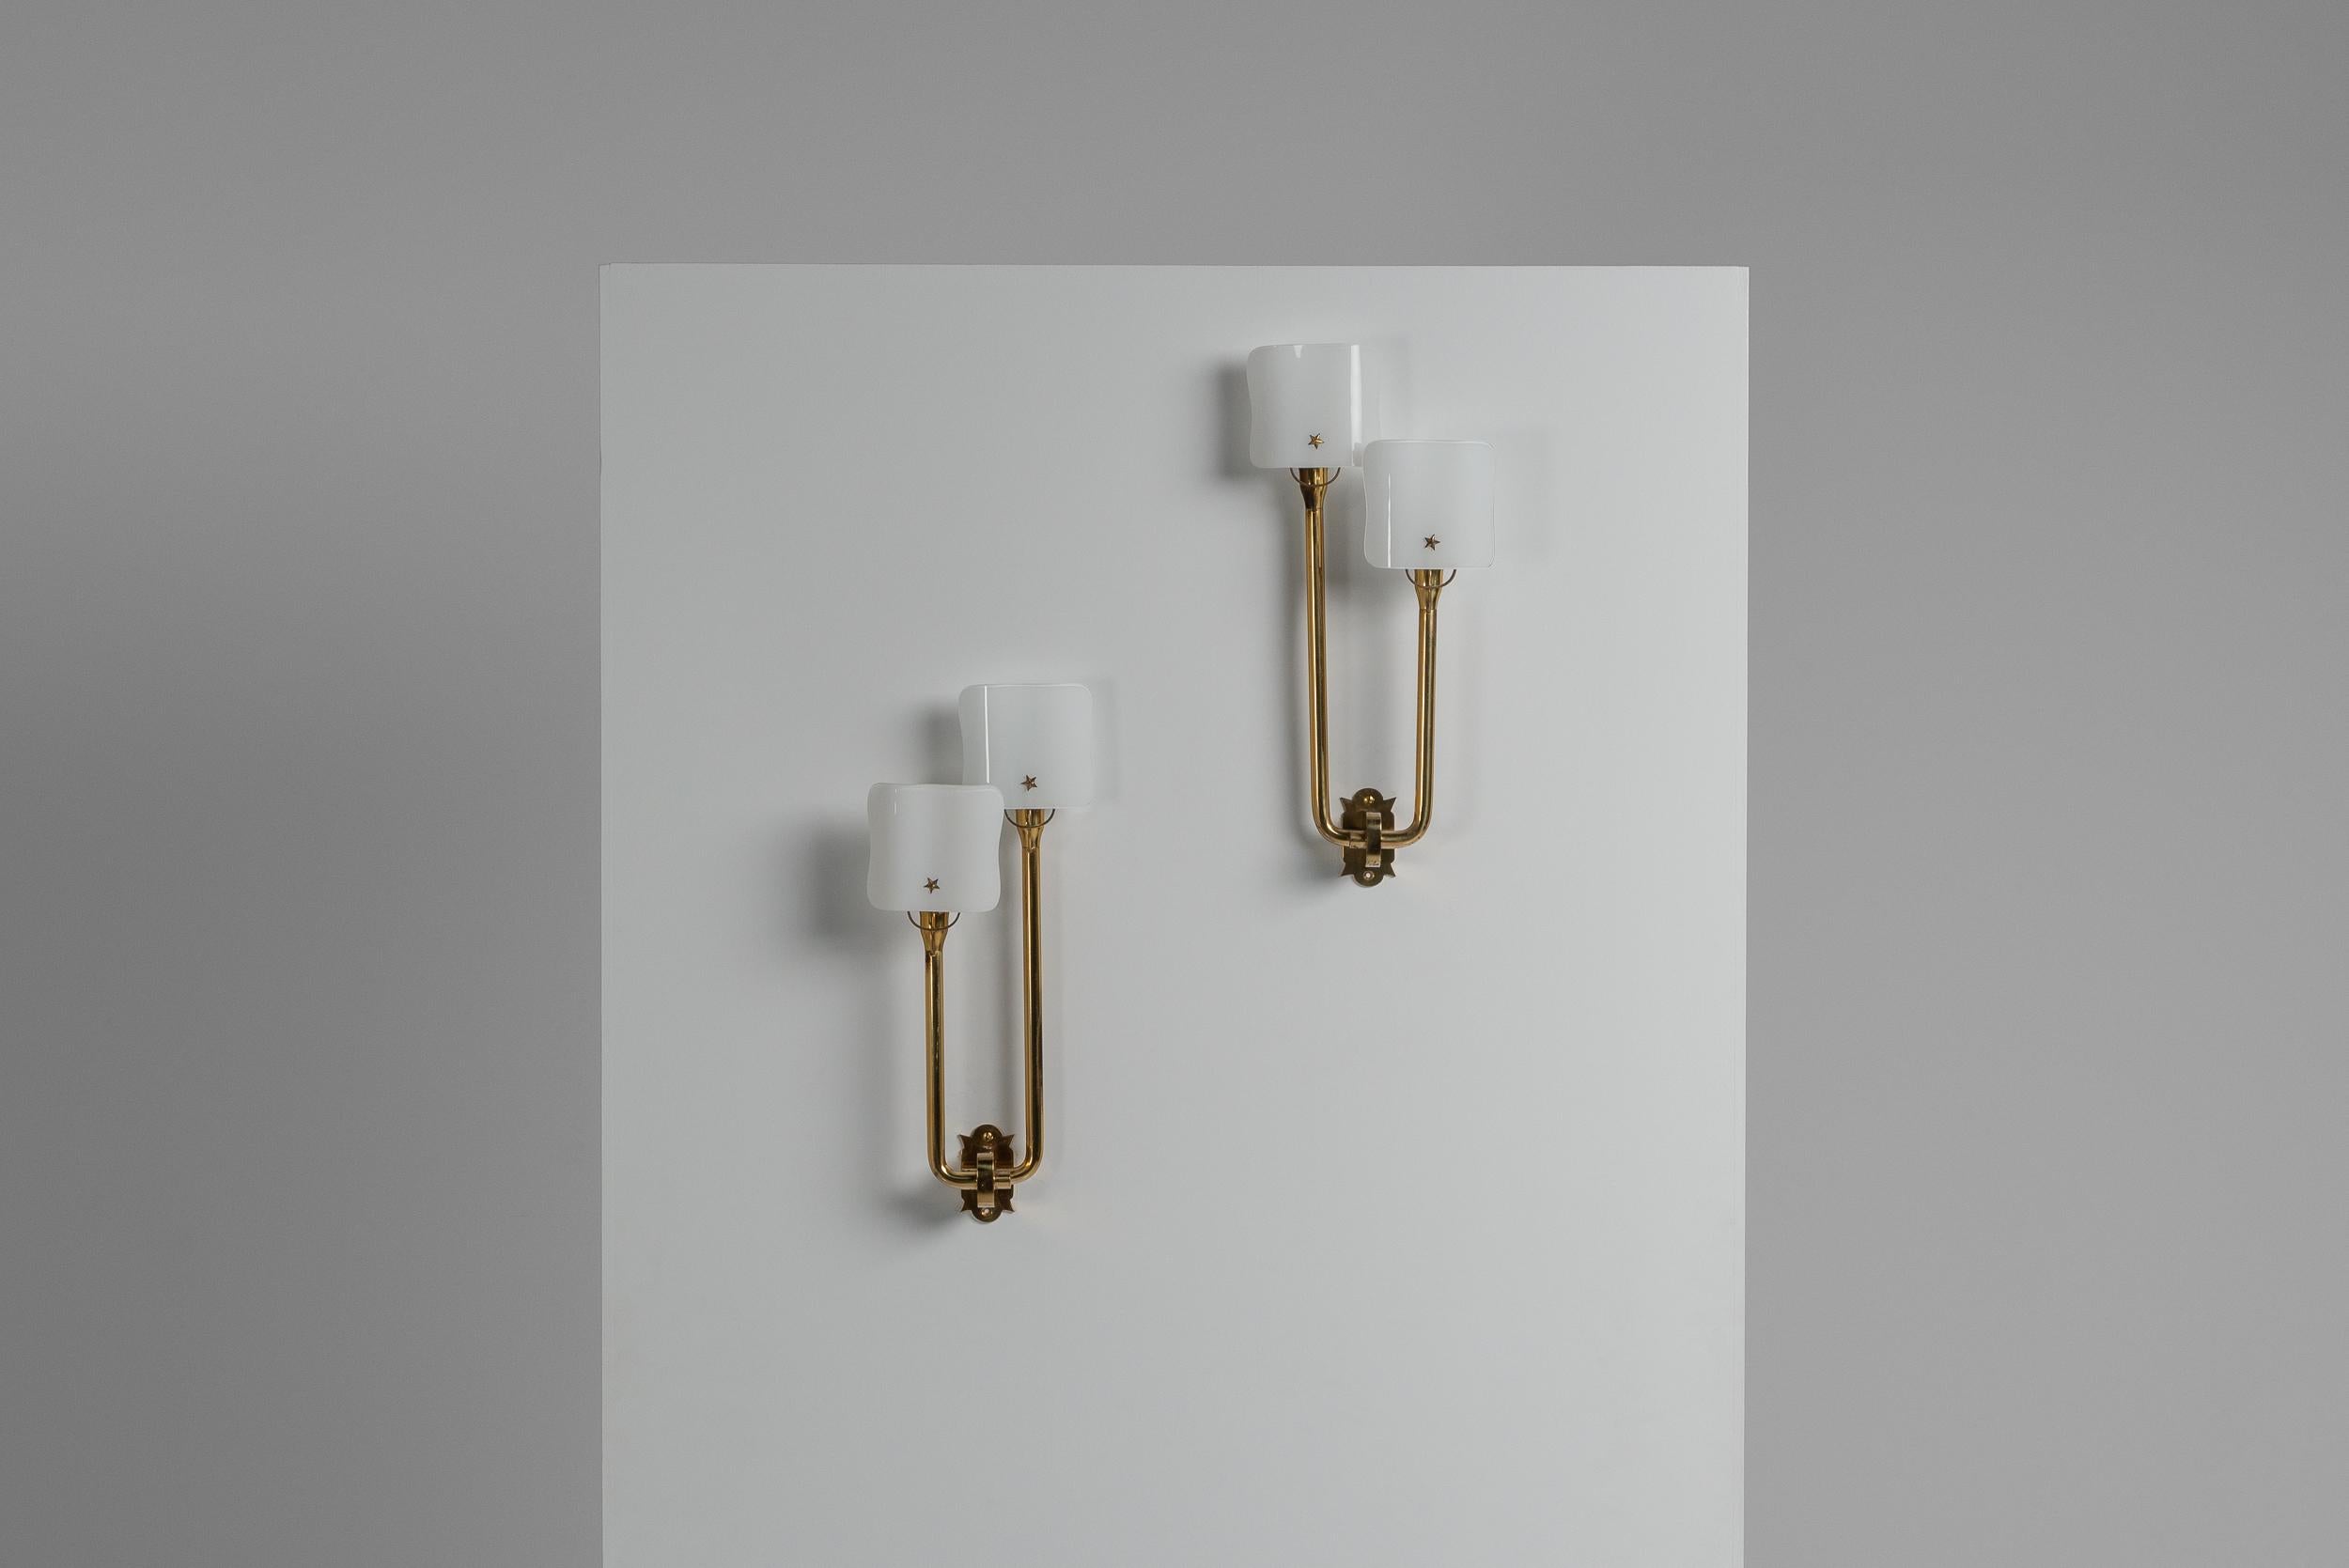 Highly rare pair of wall lamps designed by Pietro Chiesa and manufactured by Fontana Arte in Italy in 1940. These early wall lamps have a solid brass structure and milk glass shades in an abstract flower shape. A nice detail is the brass star which